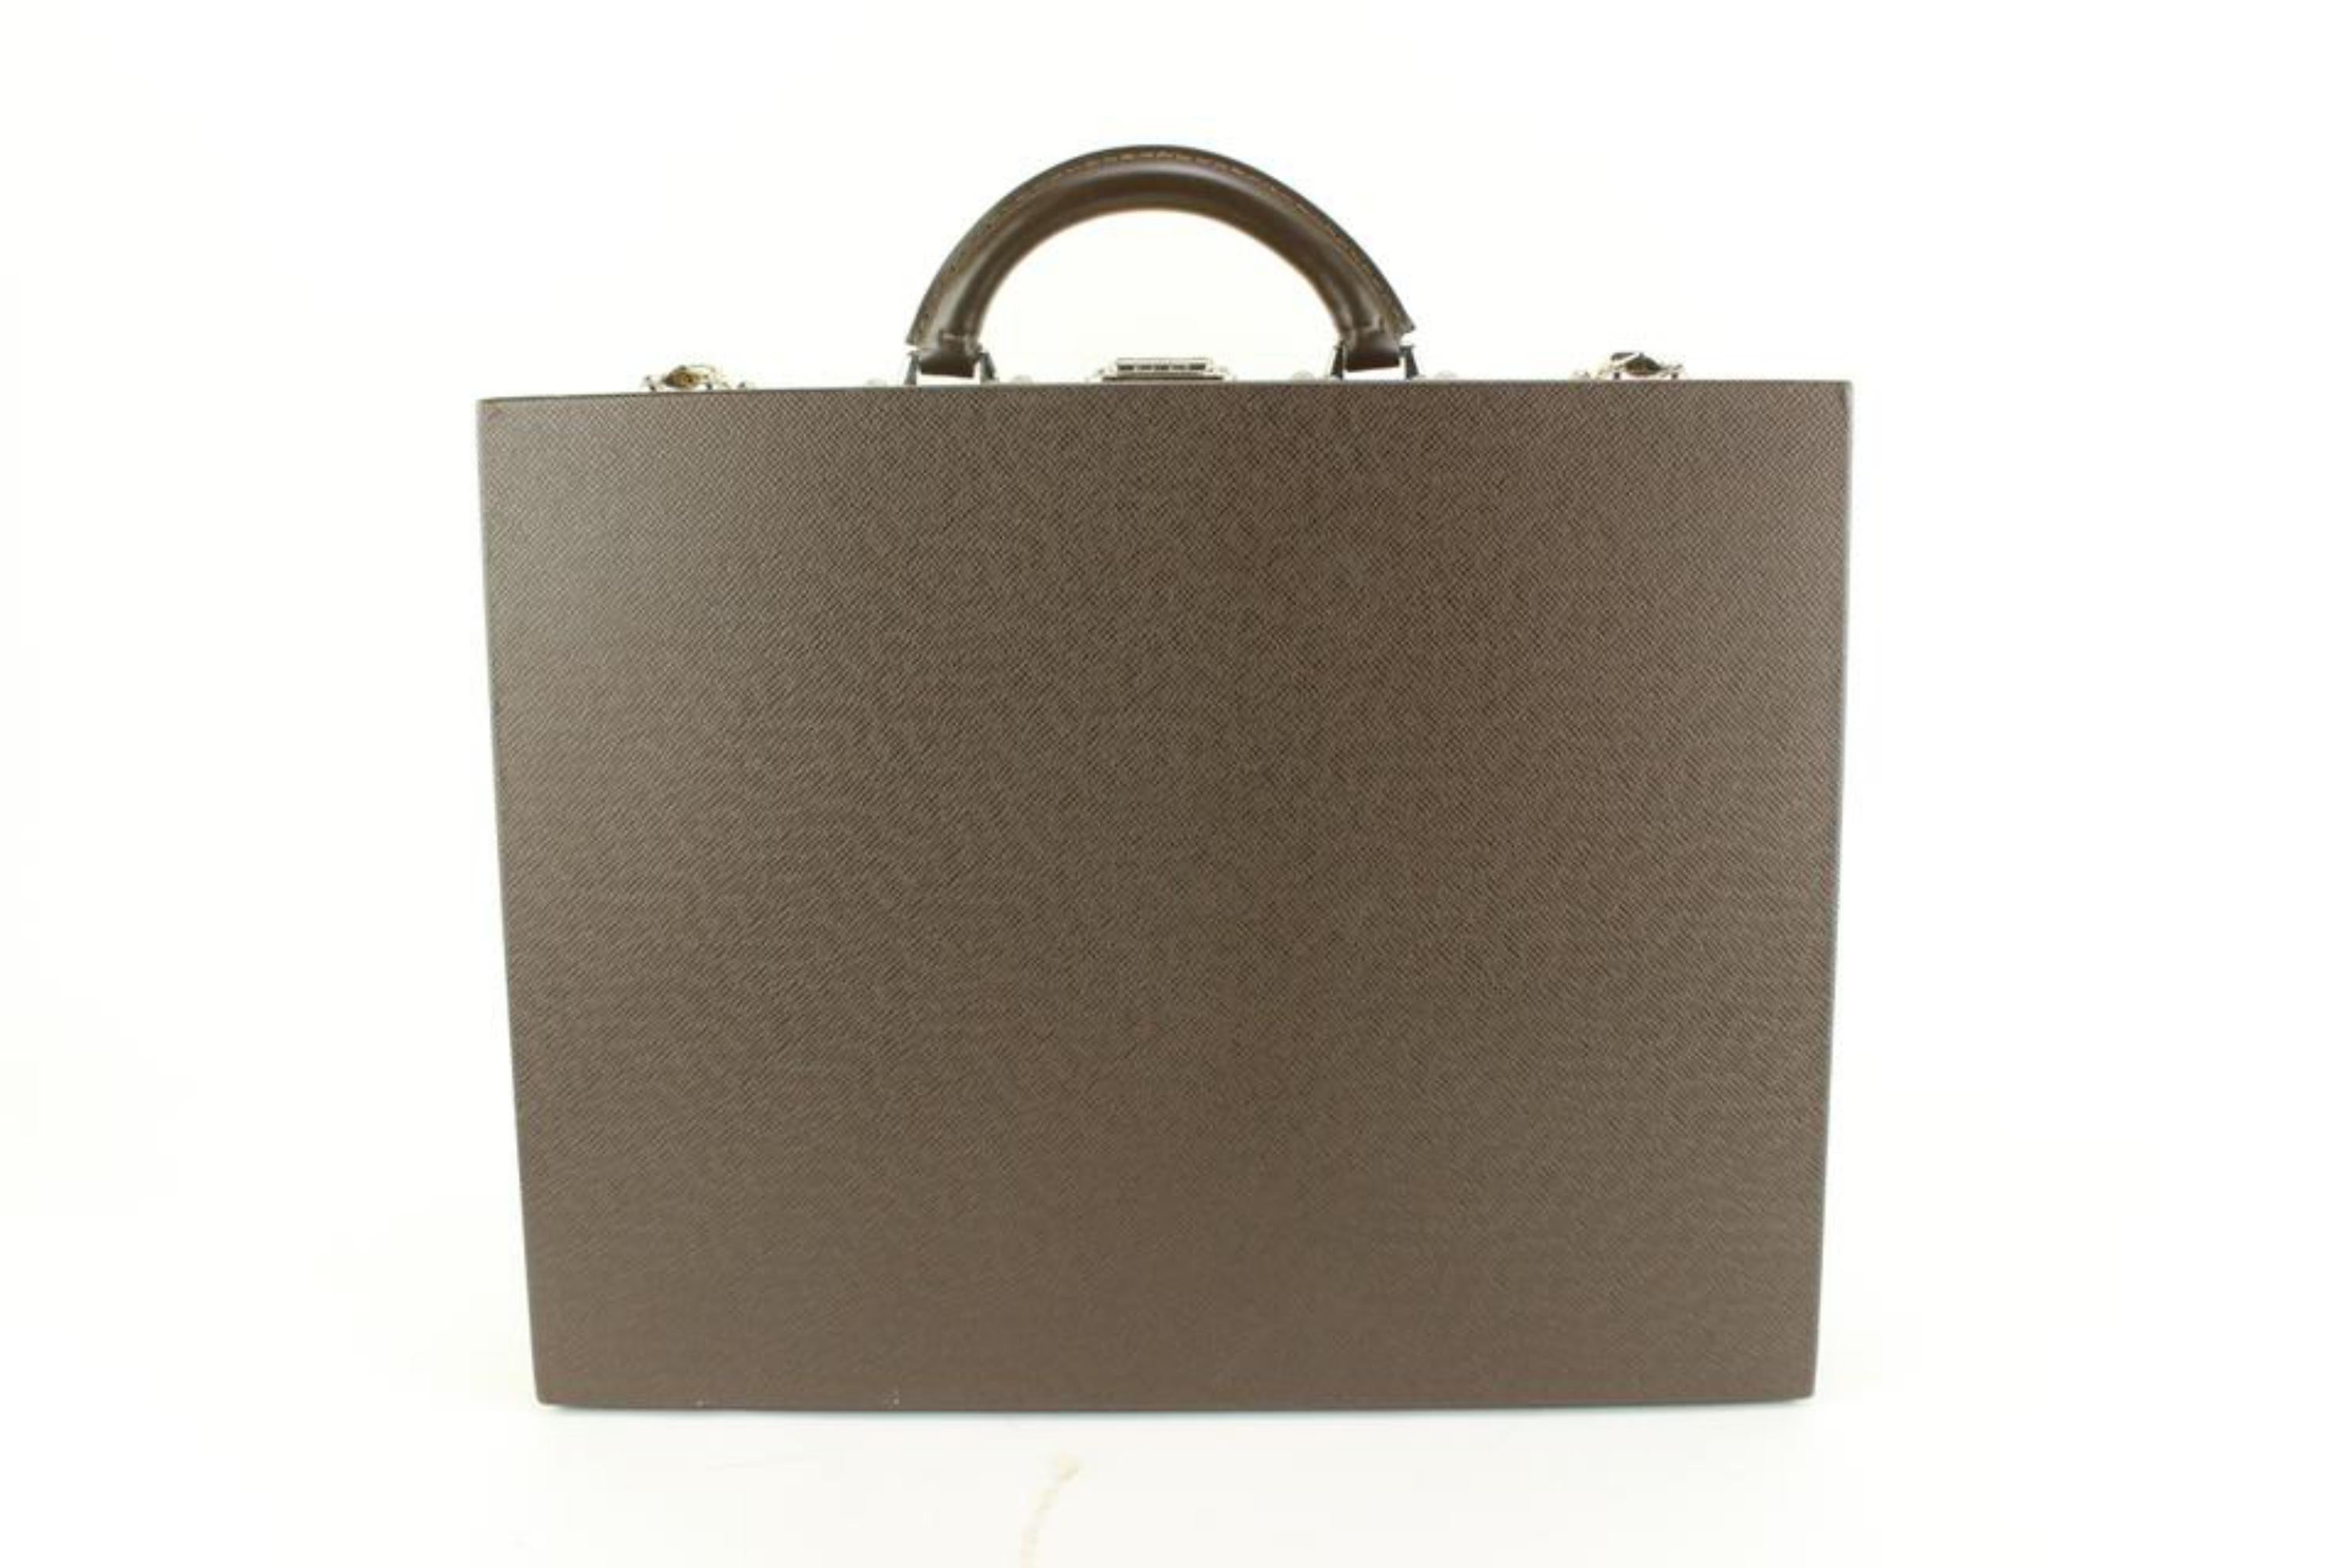 An Exotic Leather Briefcase From Louis Vuitton Is For You, The Boss